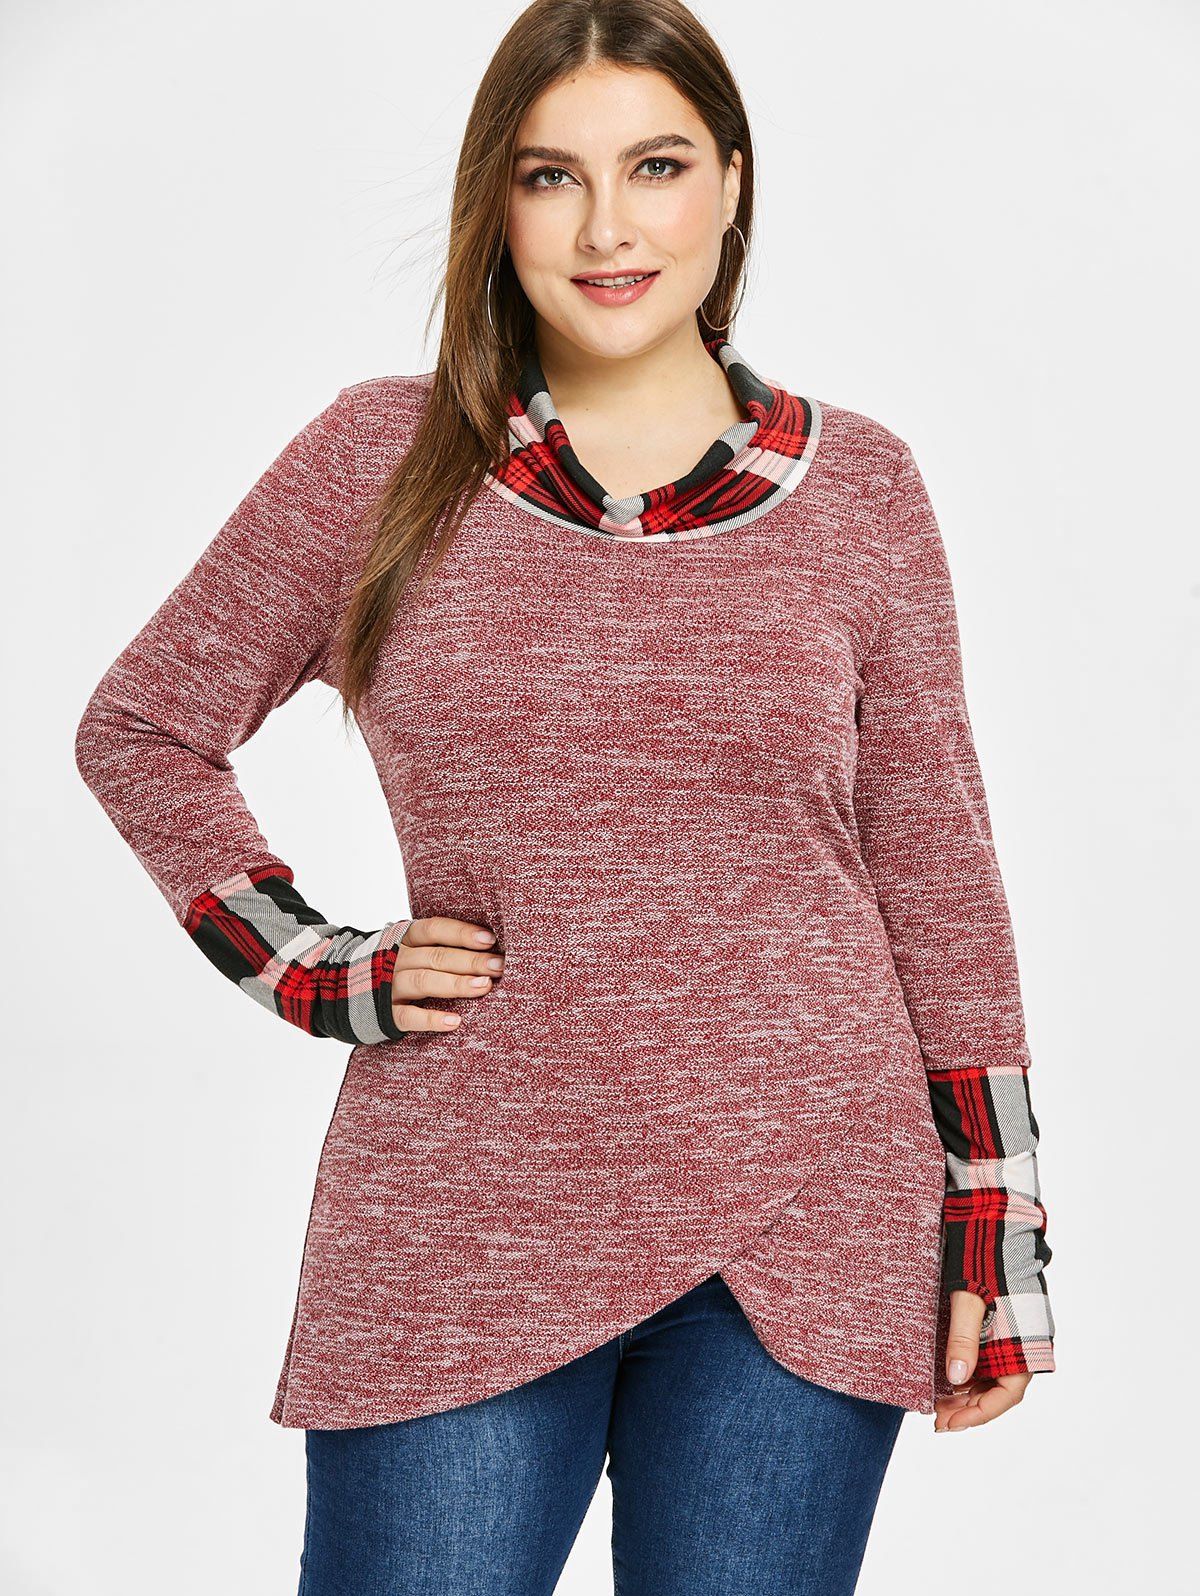 [26% OFF] 2021 Plus Size Cowl Neck Plaid Trim Marled Top In CHERRY RED ...